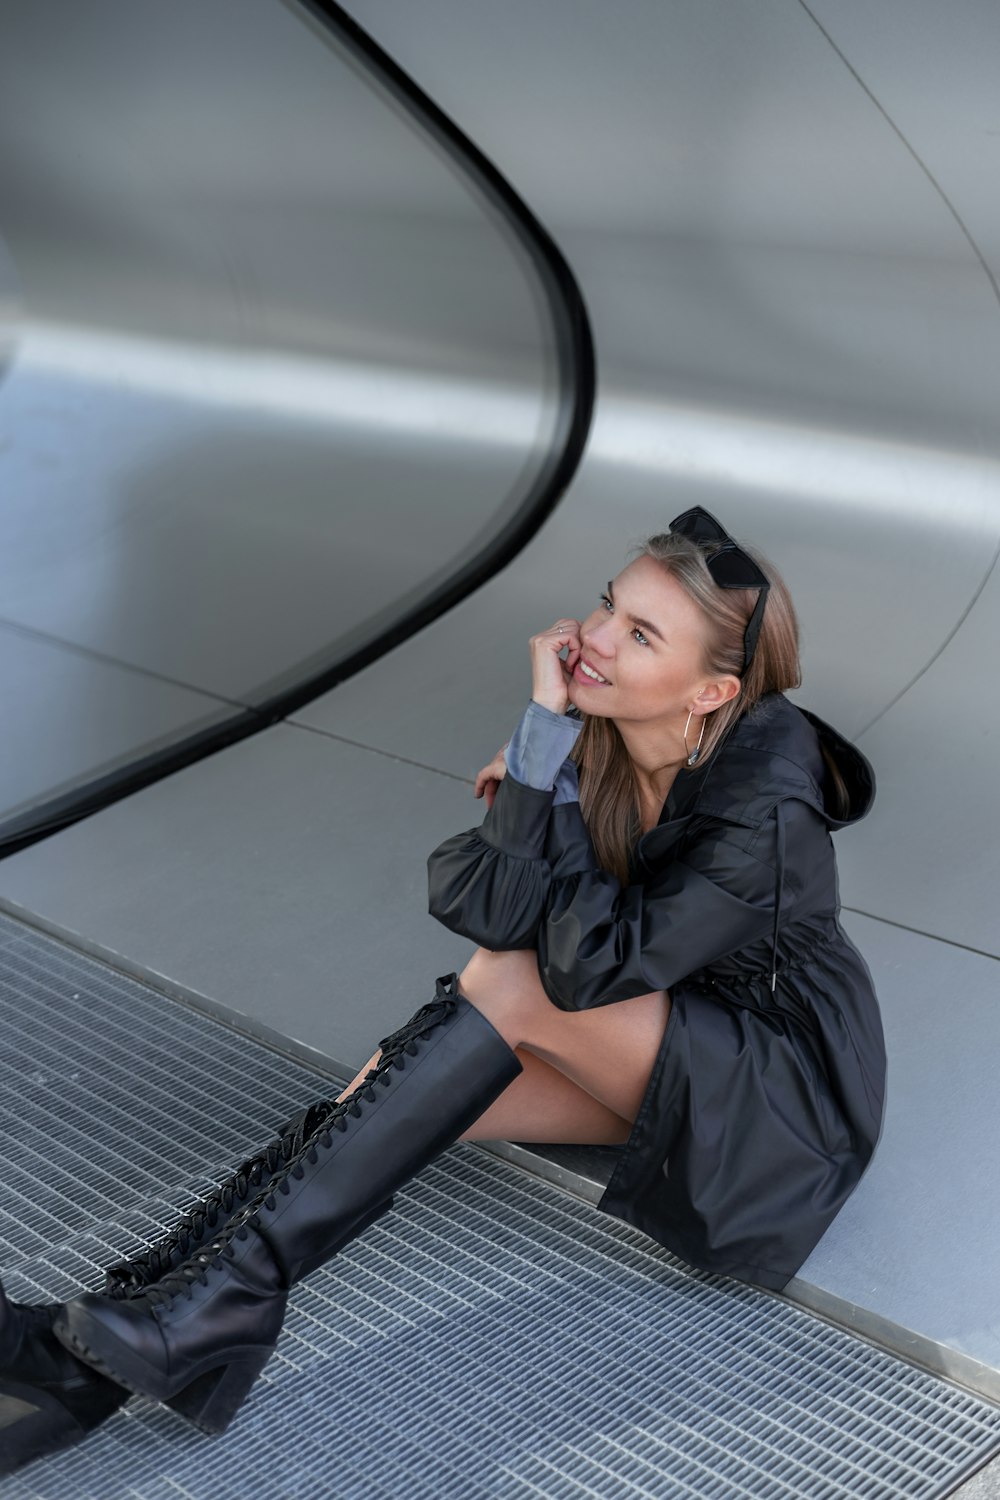 a woman sitting on the ground talking on a cell phone